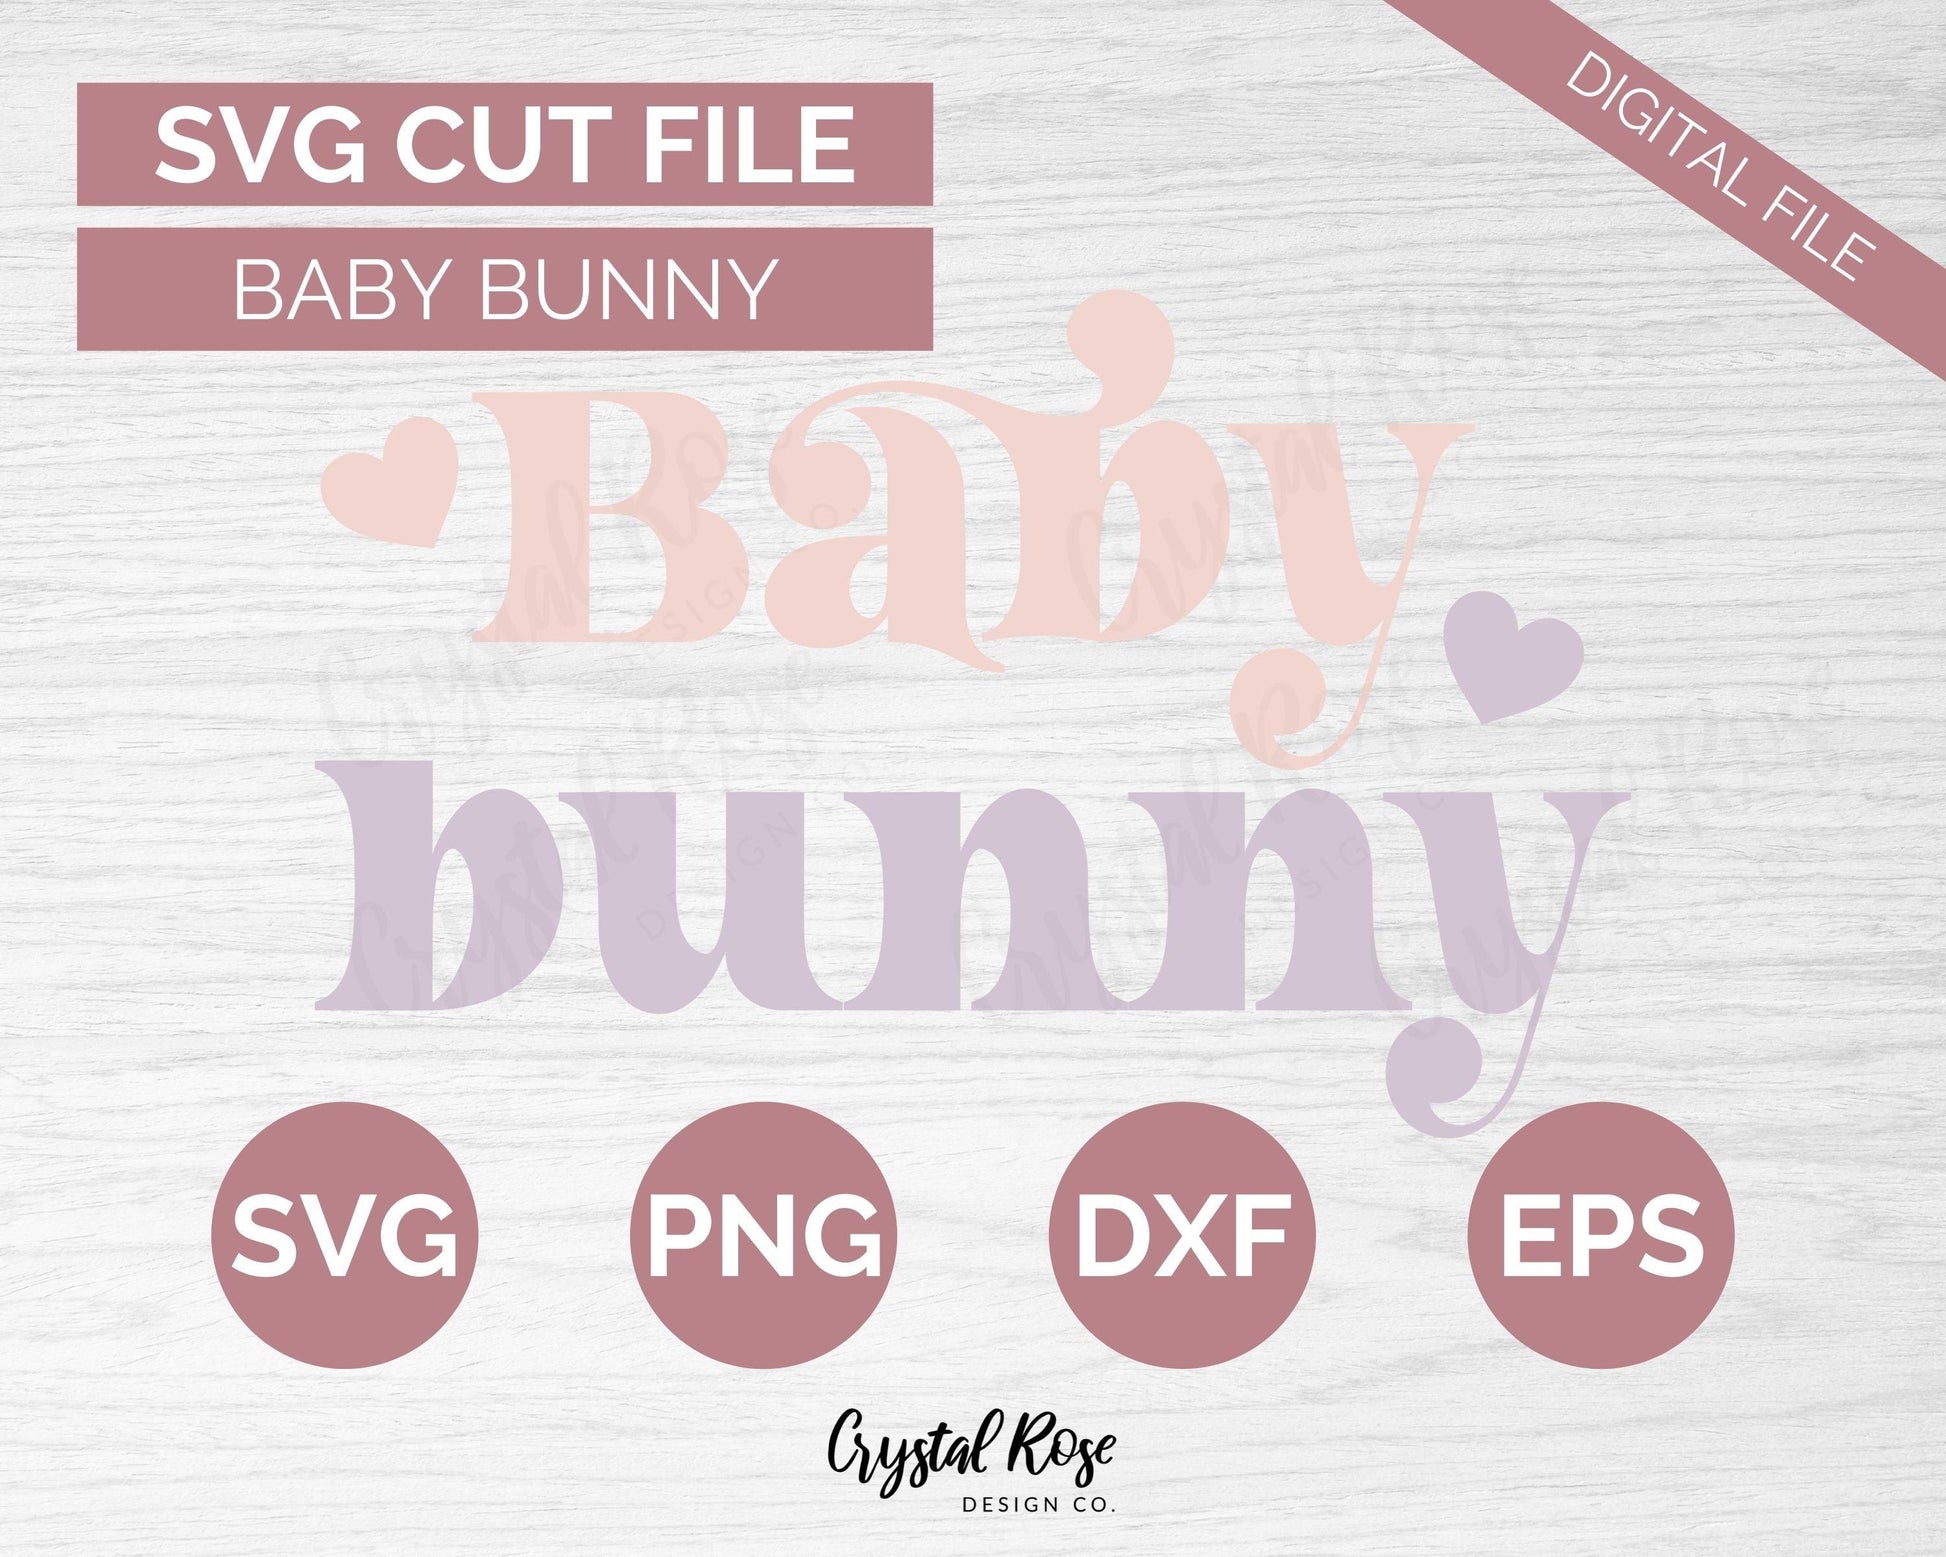 Baby Bunny SVG, Easter SVG, Digital Download, Cricut, Silhouette, Glowforge (includes svg/png/dxf/eps) - Crystal Rose Design Co.